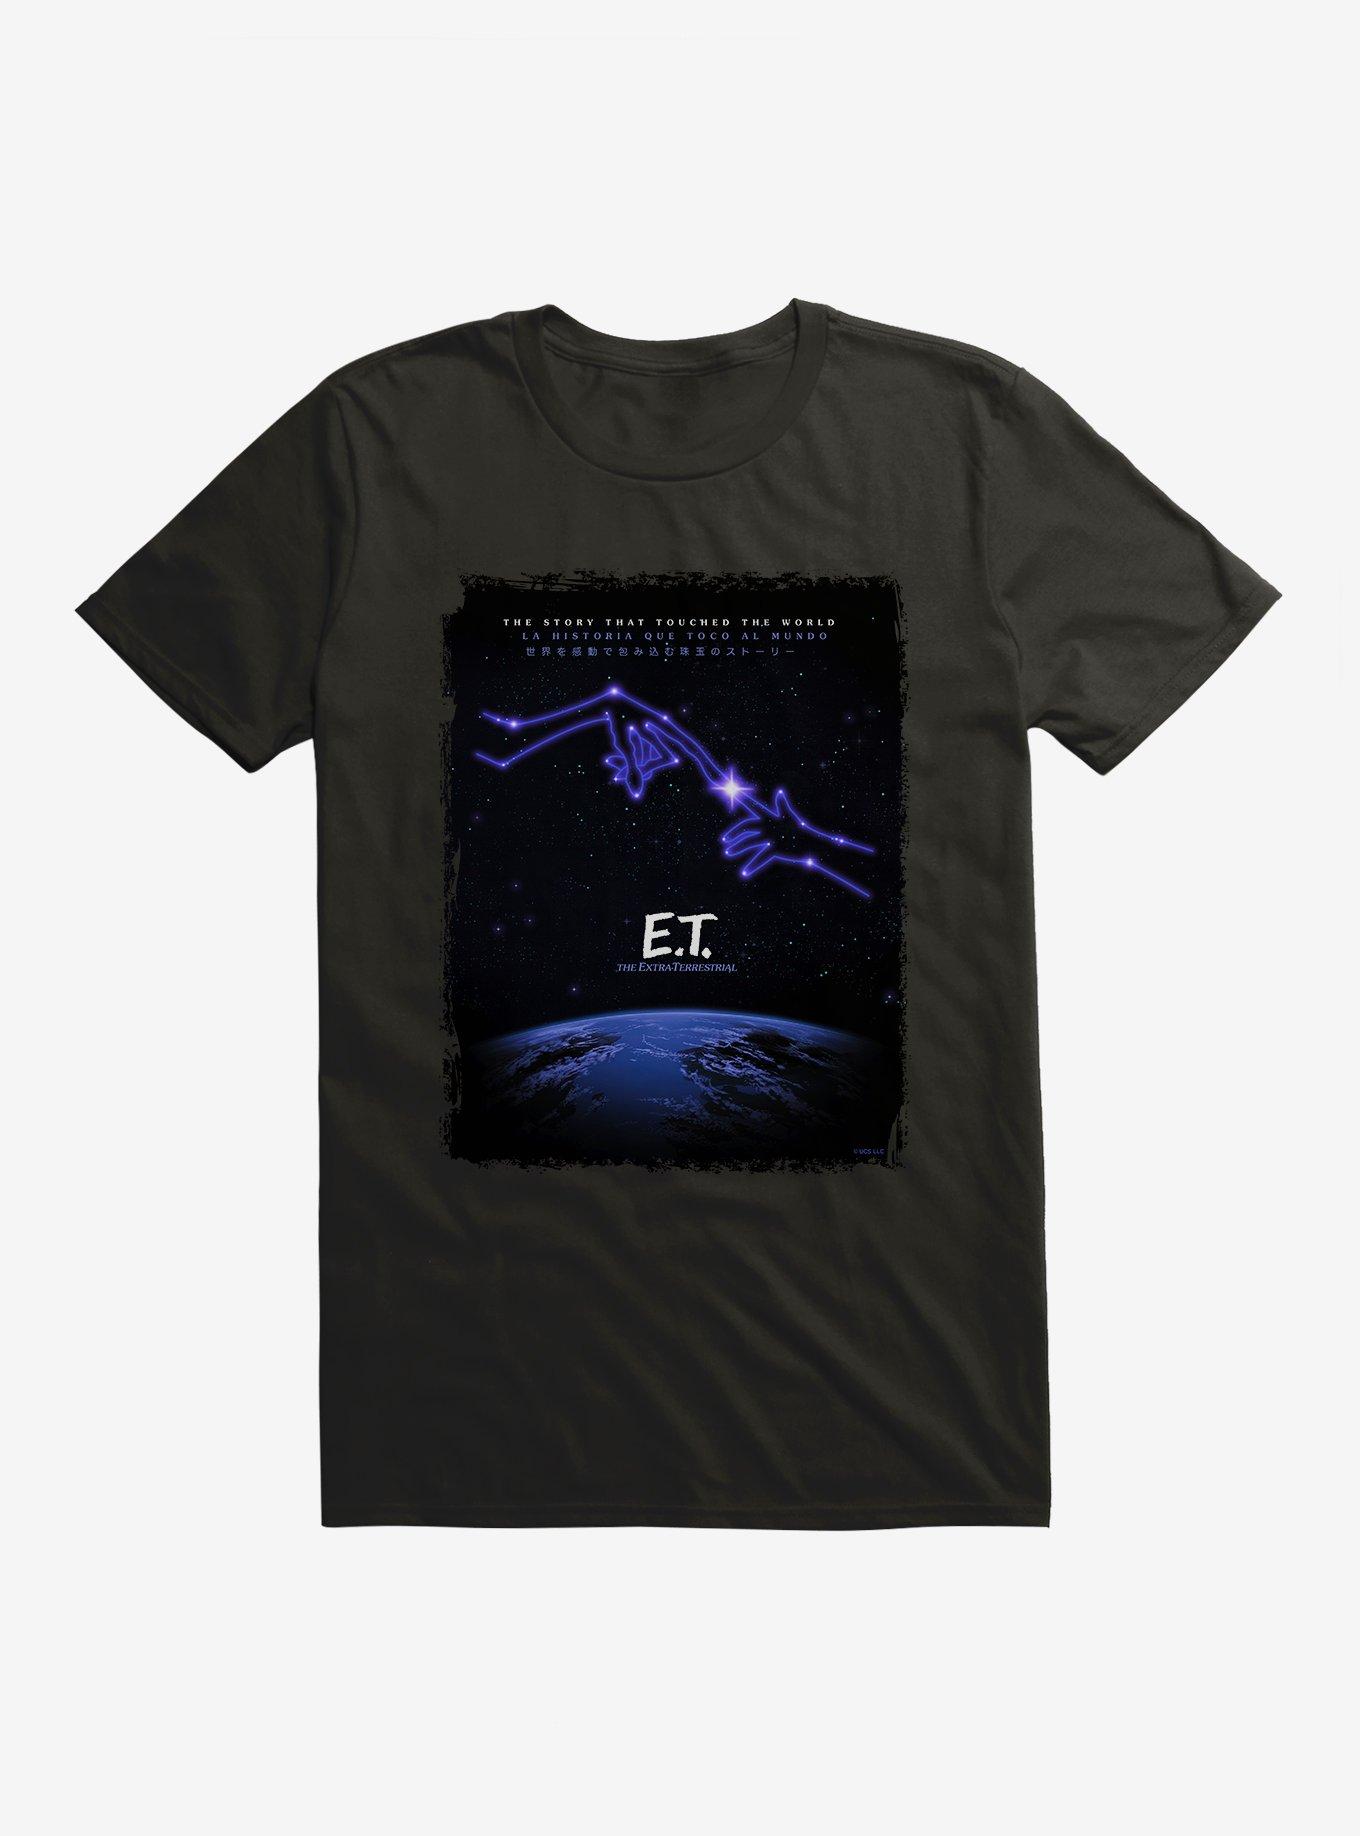 E.T. 40th Anniversary The Story That Touched World T-Shirt